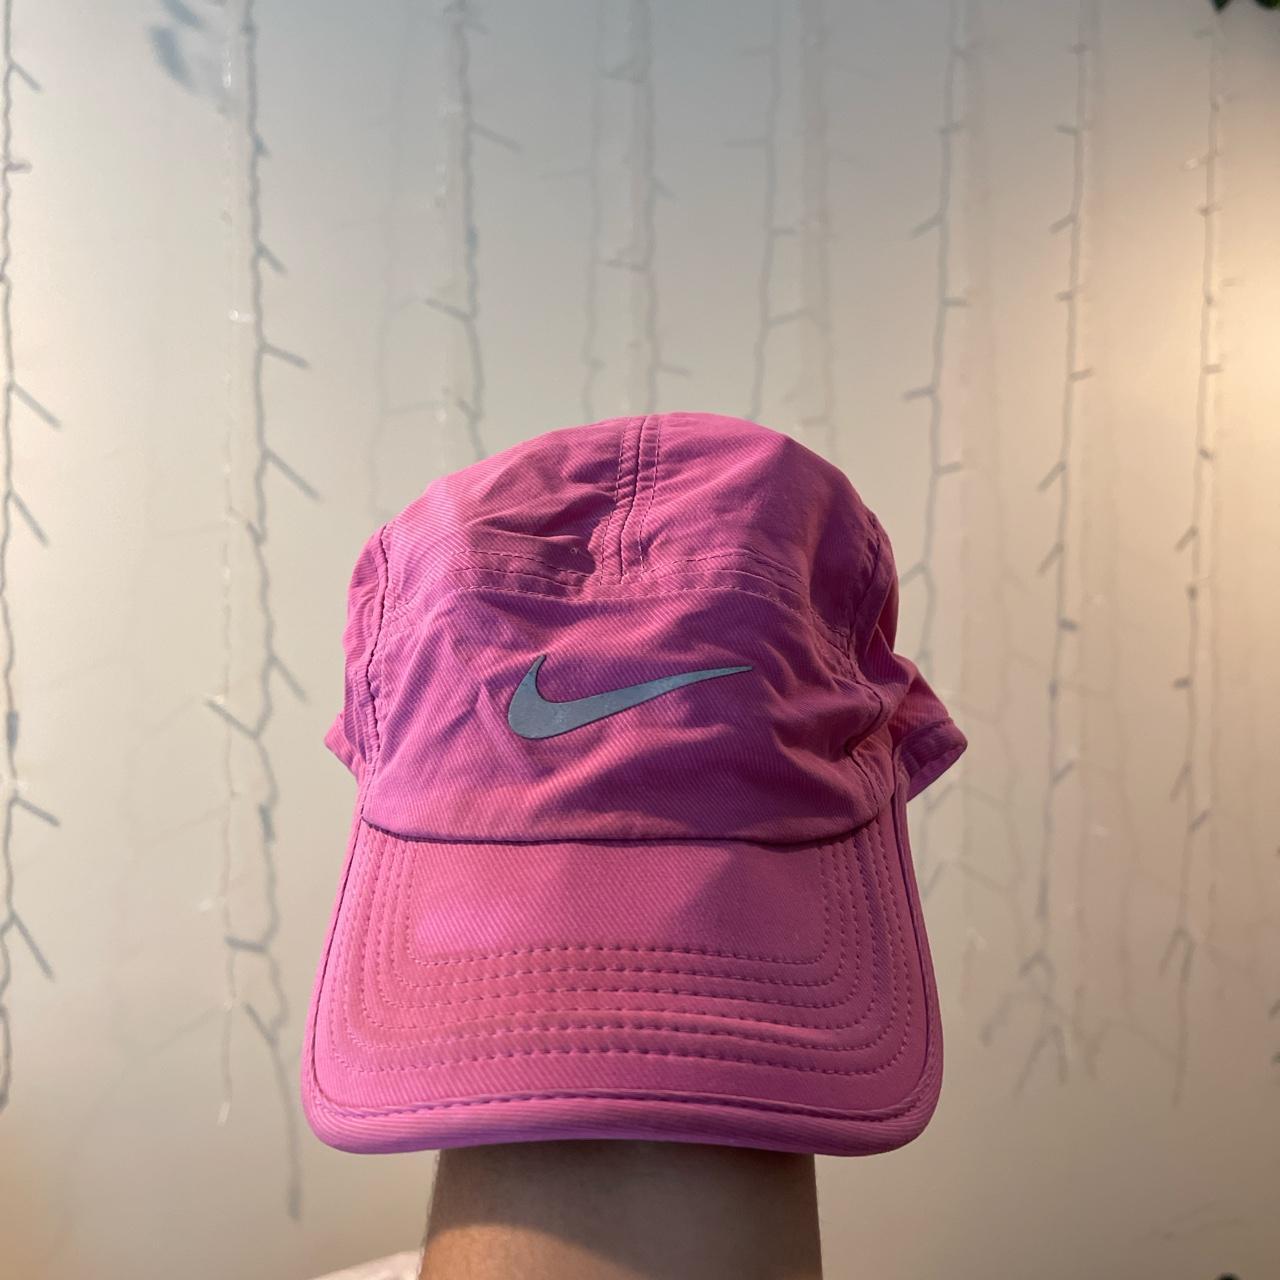 Nike Women's Pink and Grey Hat | Depop